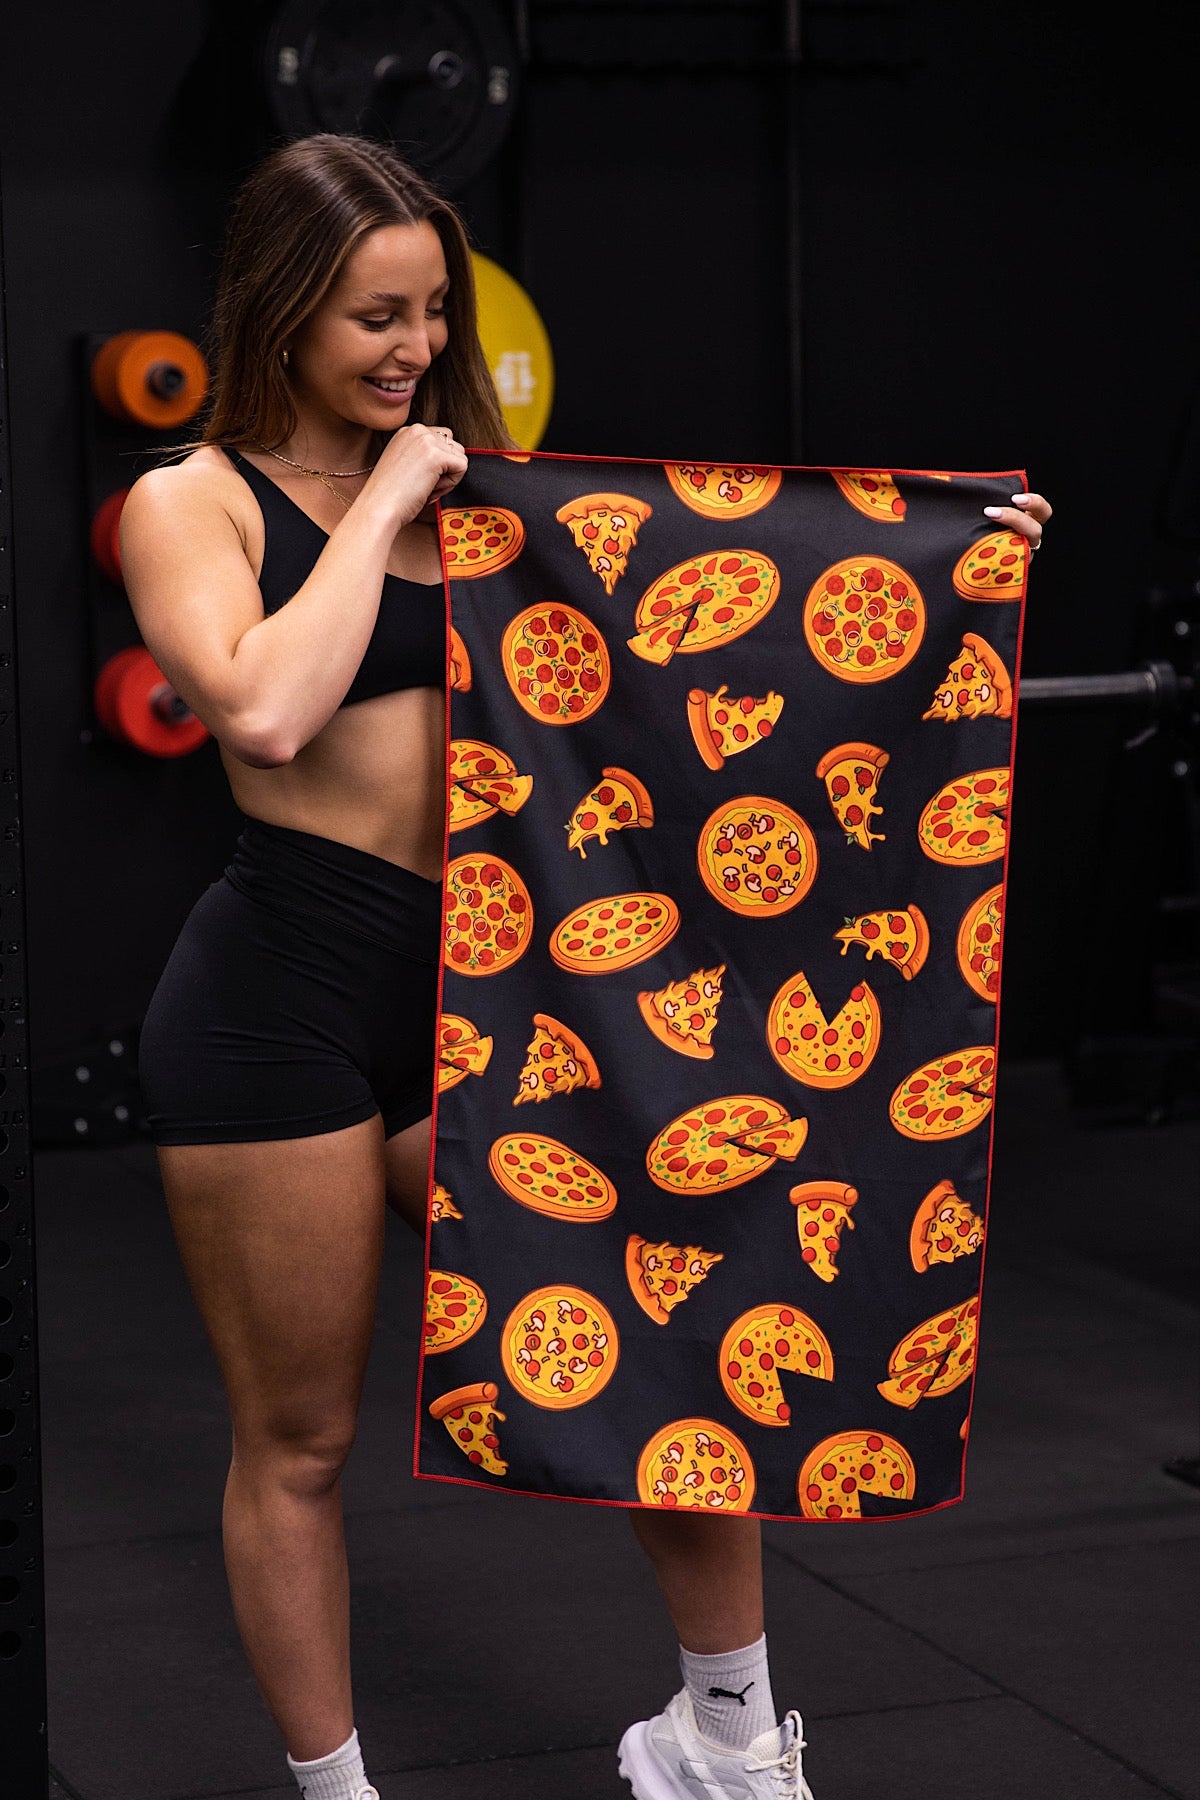 Cheeky Winx on Instagram: Here's why you need a Cheeky Winx towel 😎🌈💪  #gym #fitness #workout #roleplay #novelty #sloths #smallbusiness  #gymmotivation #pilates #yoga #weighttraining